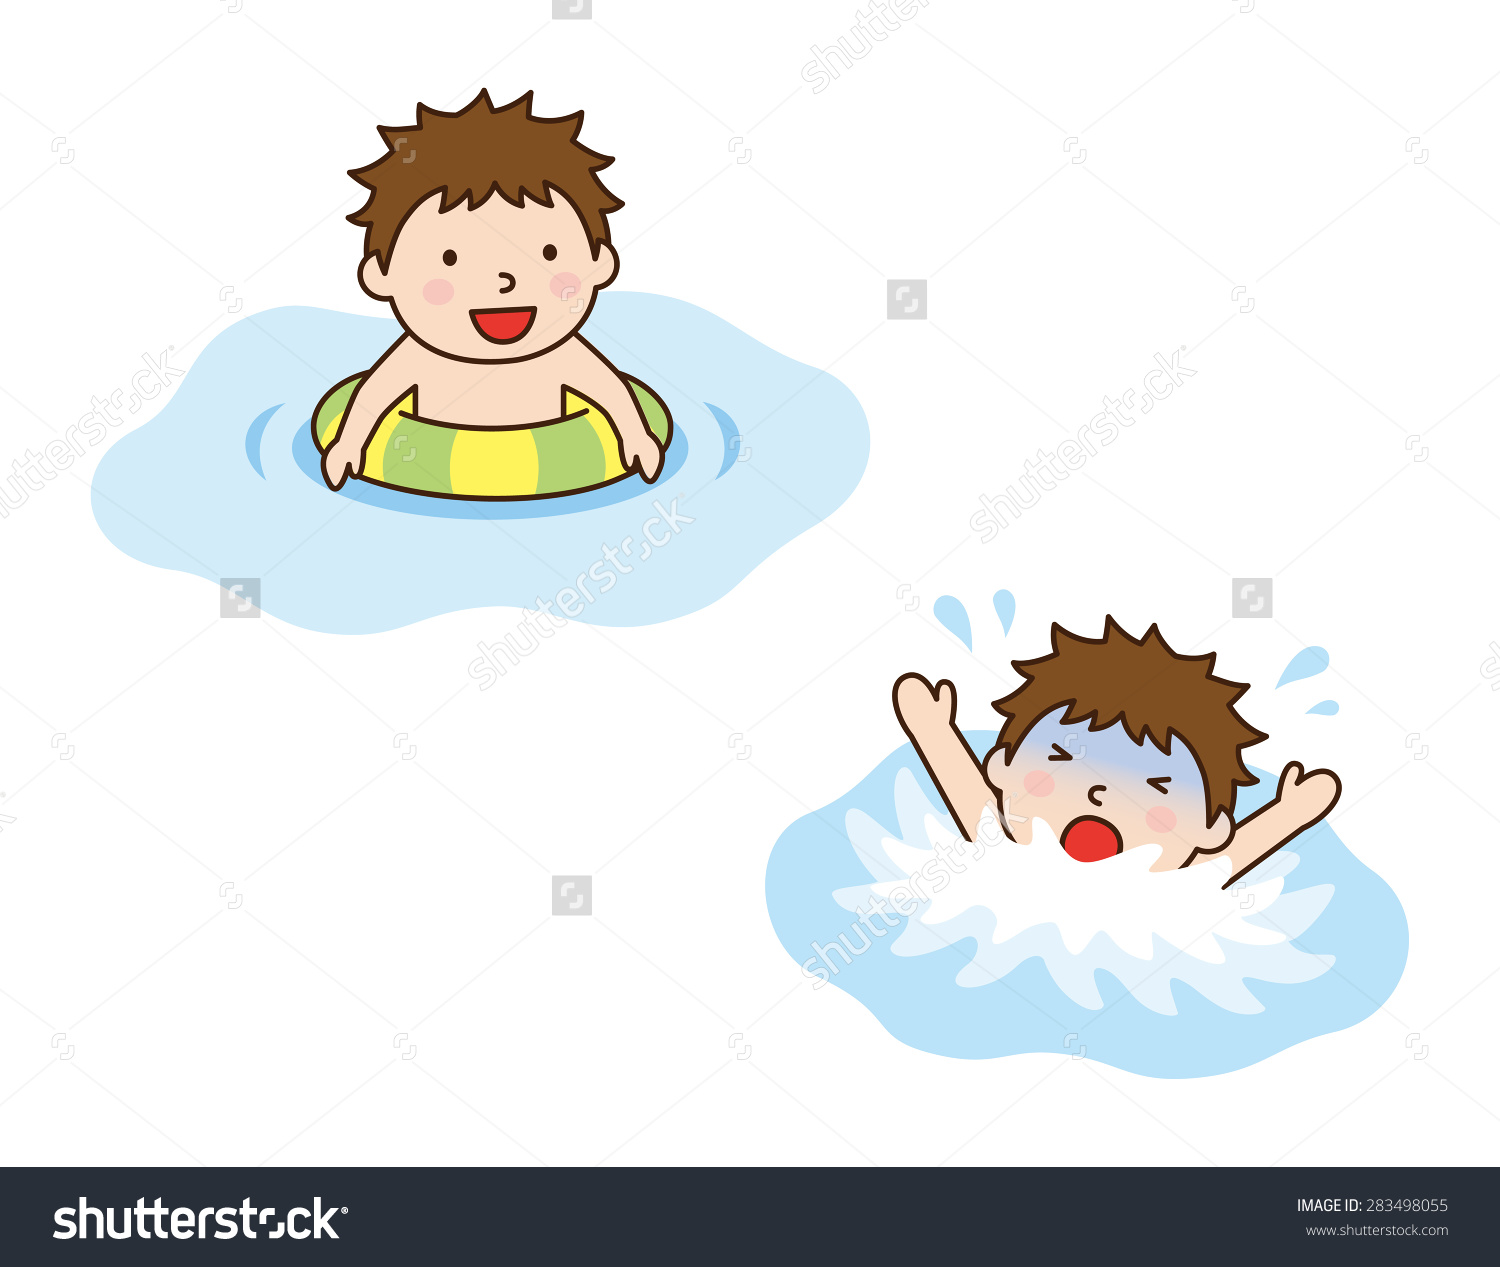 Showing post & media for Cartoon drowning clip art.